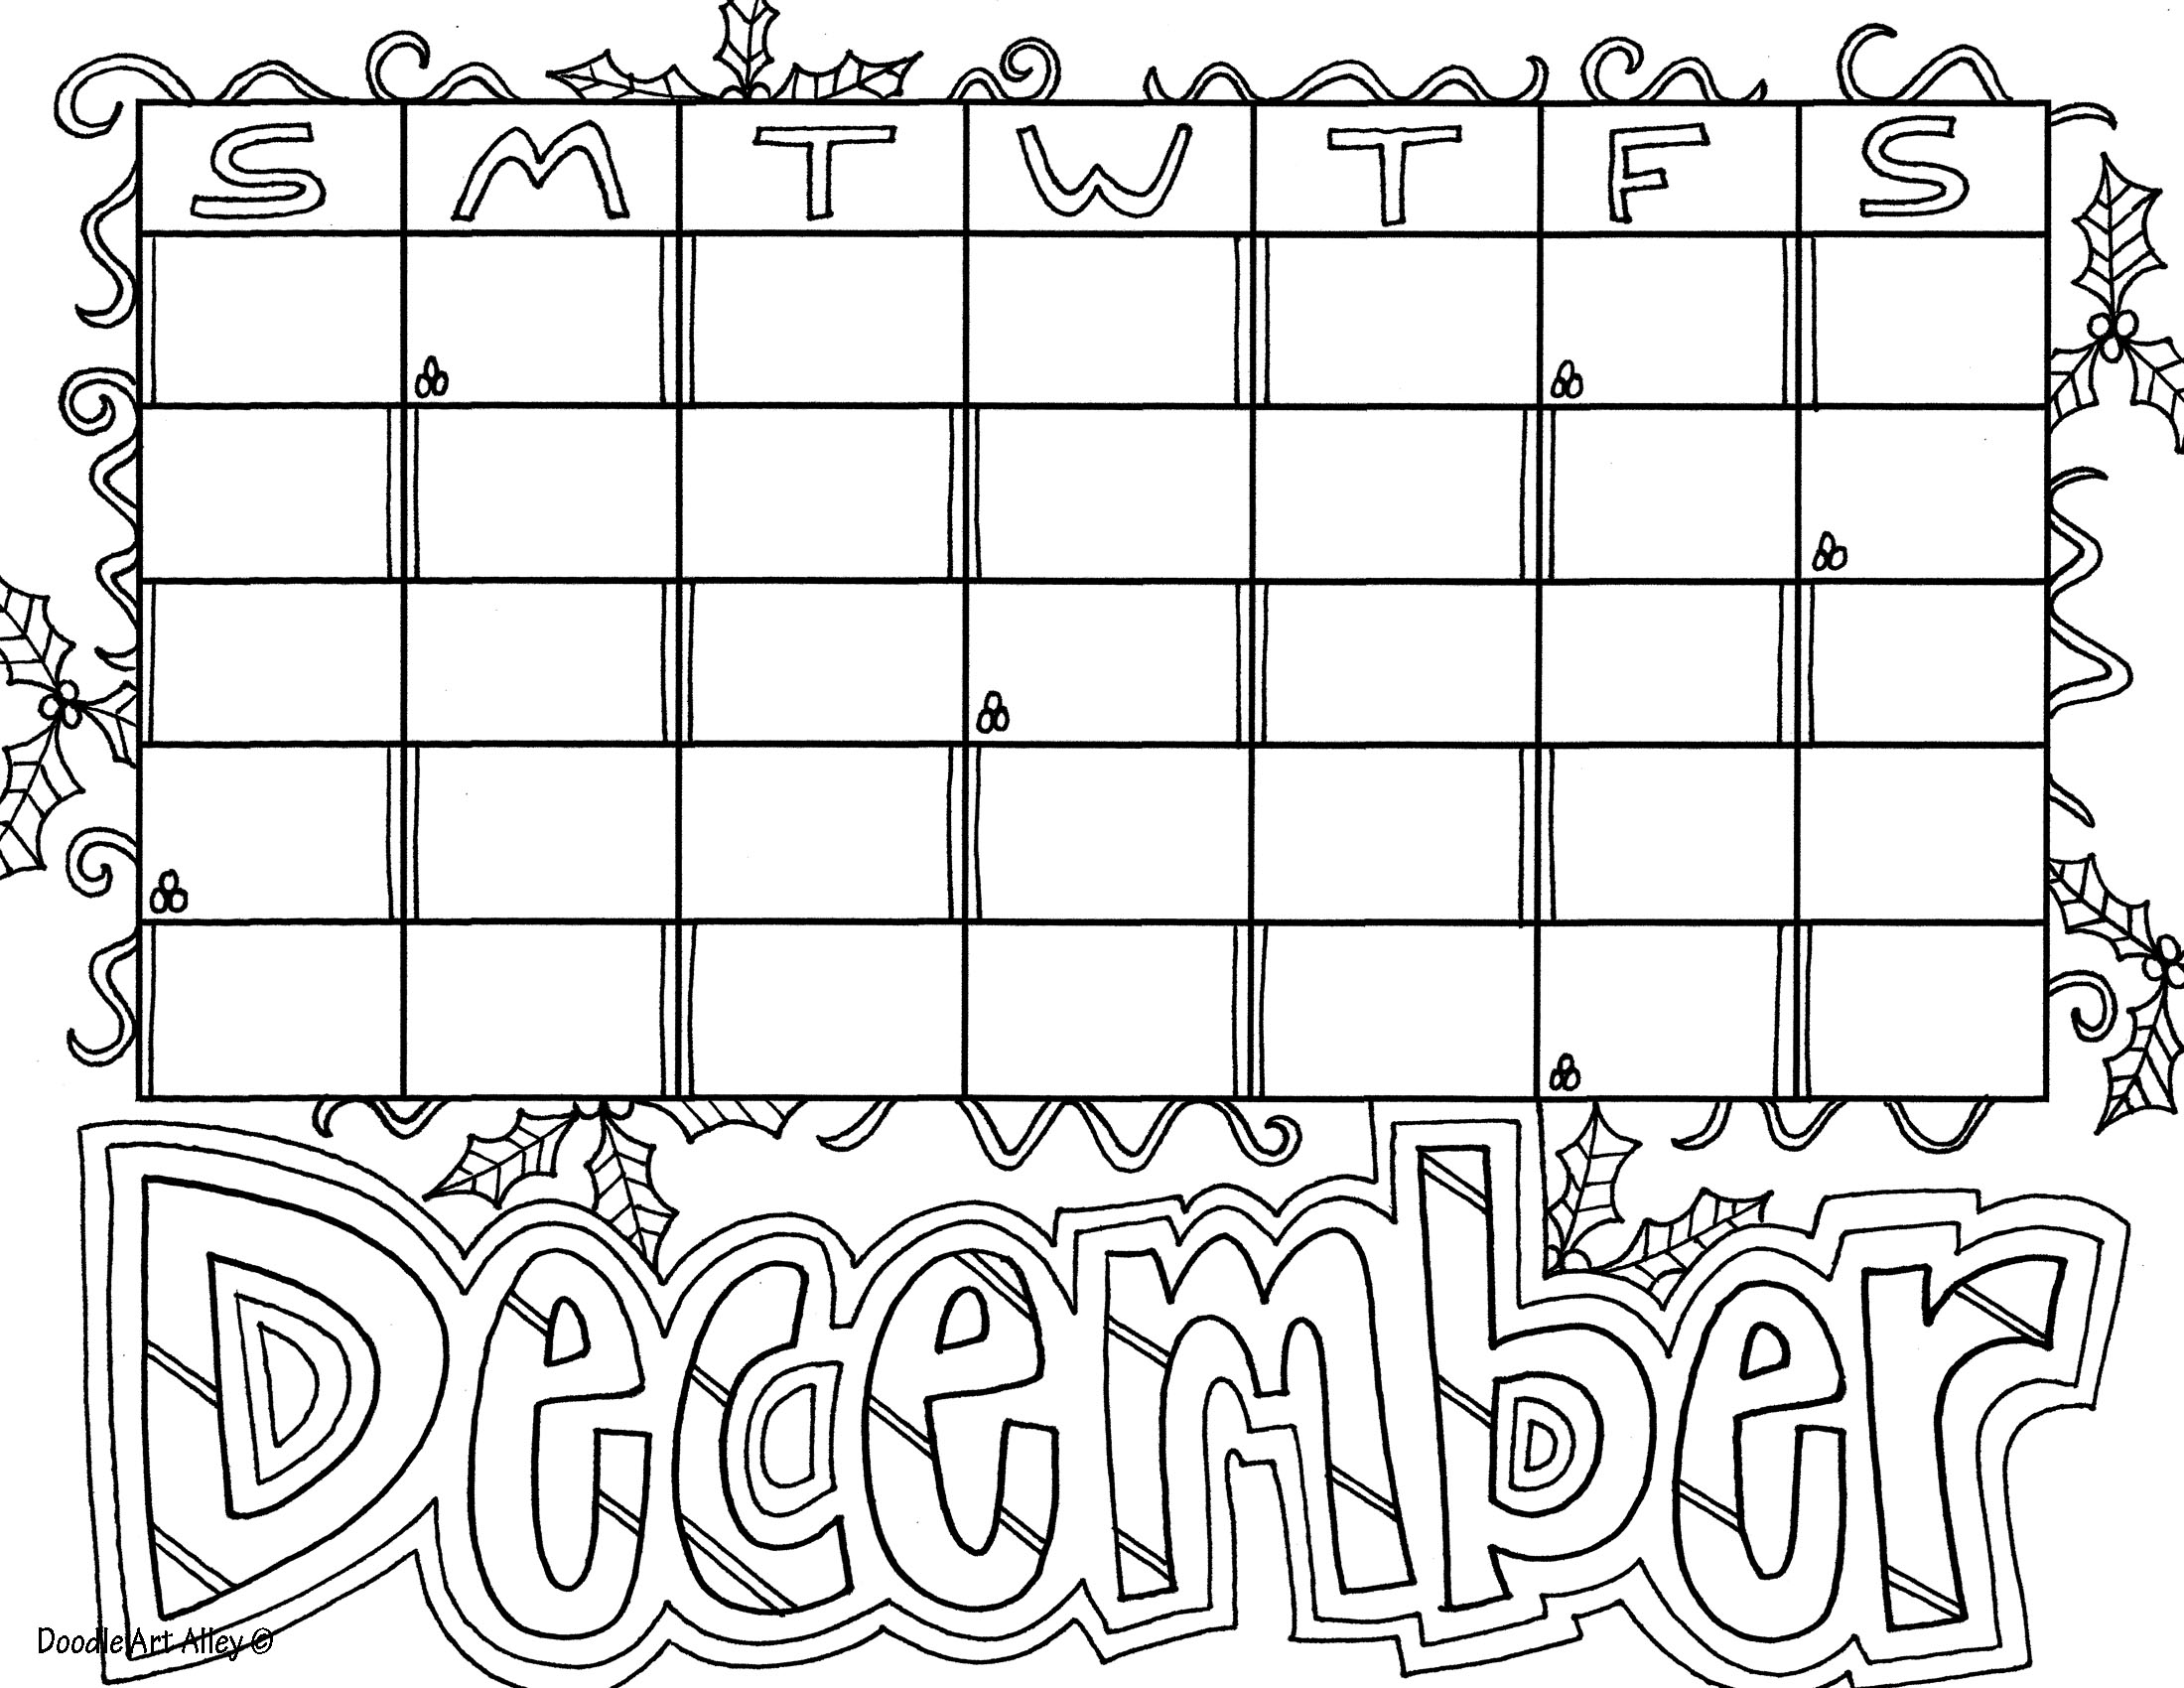 December Coloring Pages - DOODLE ART ALLEY